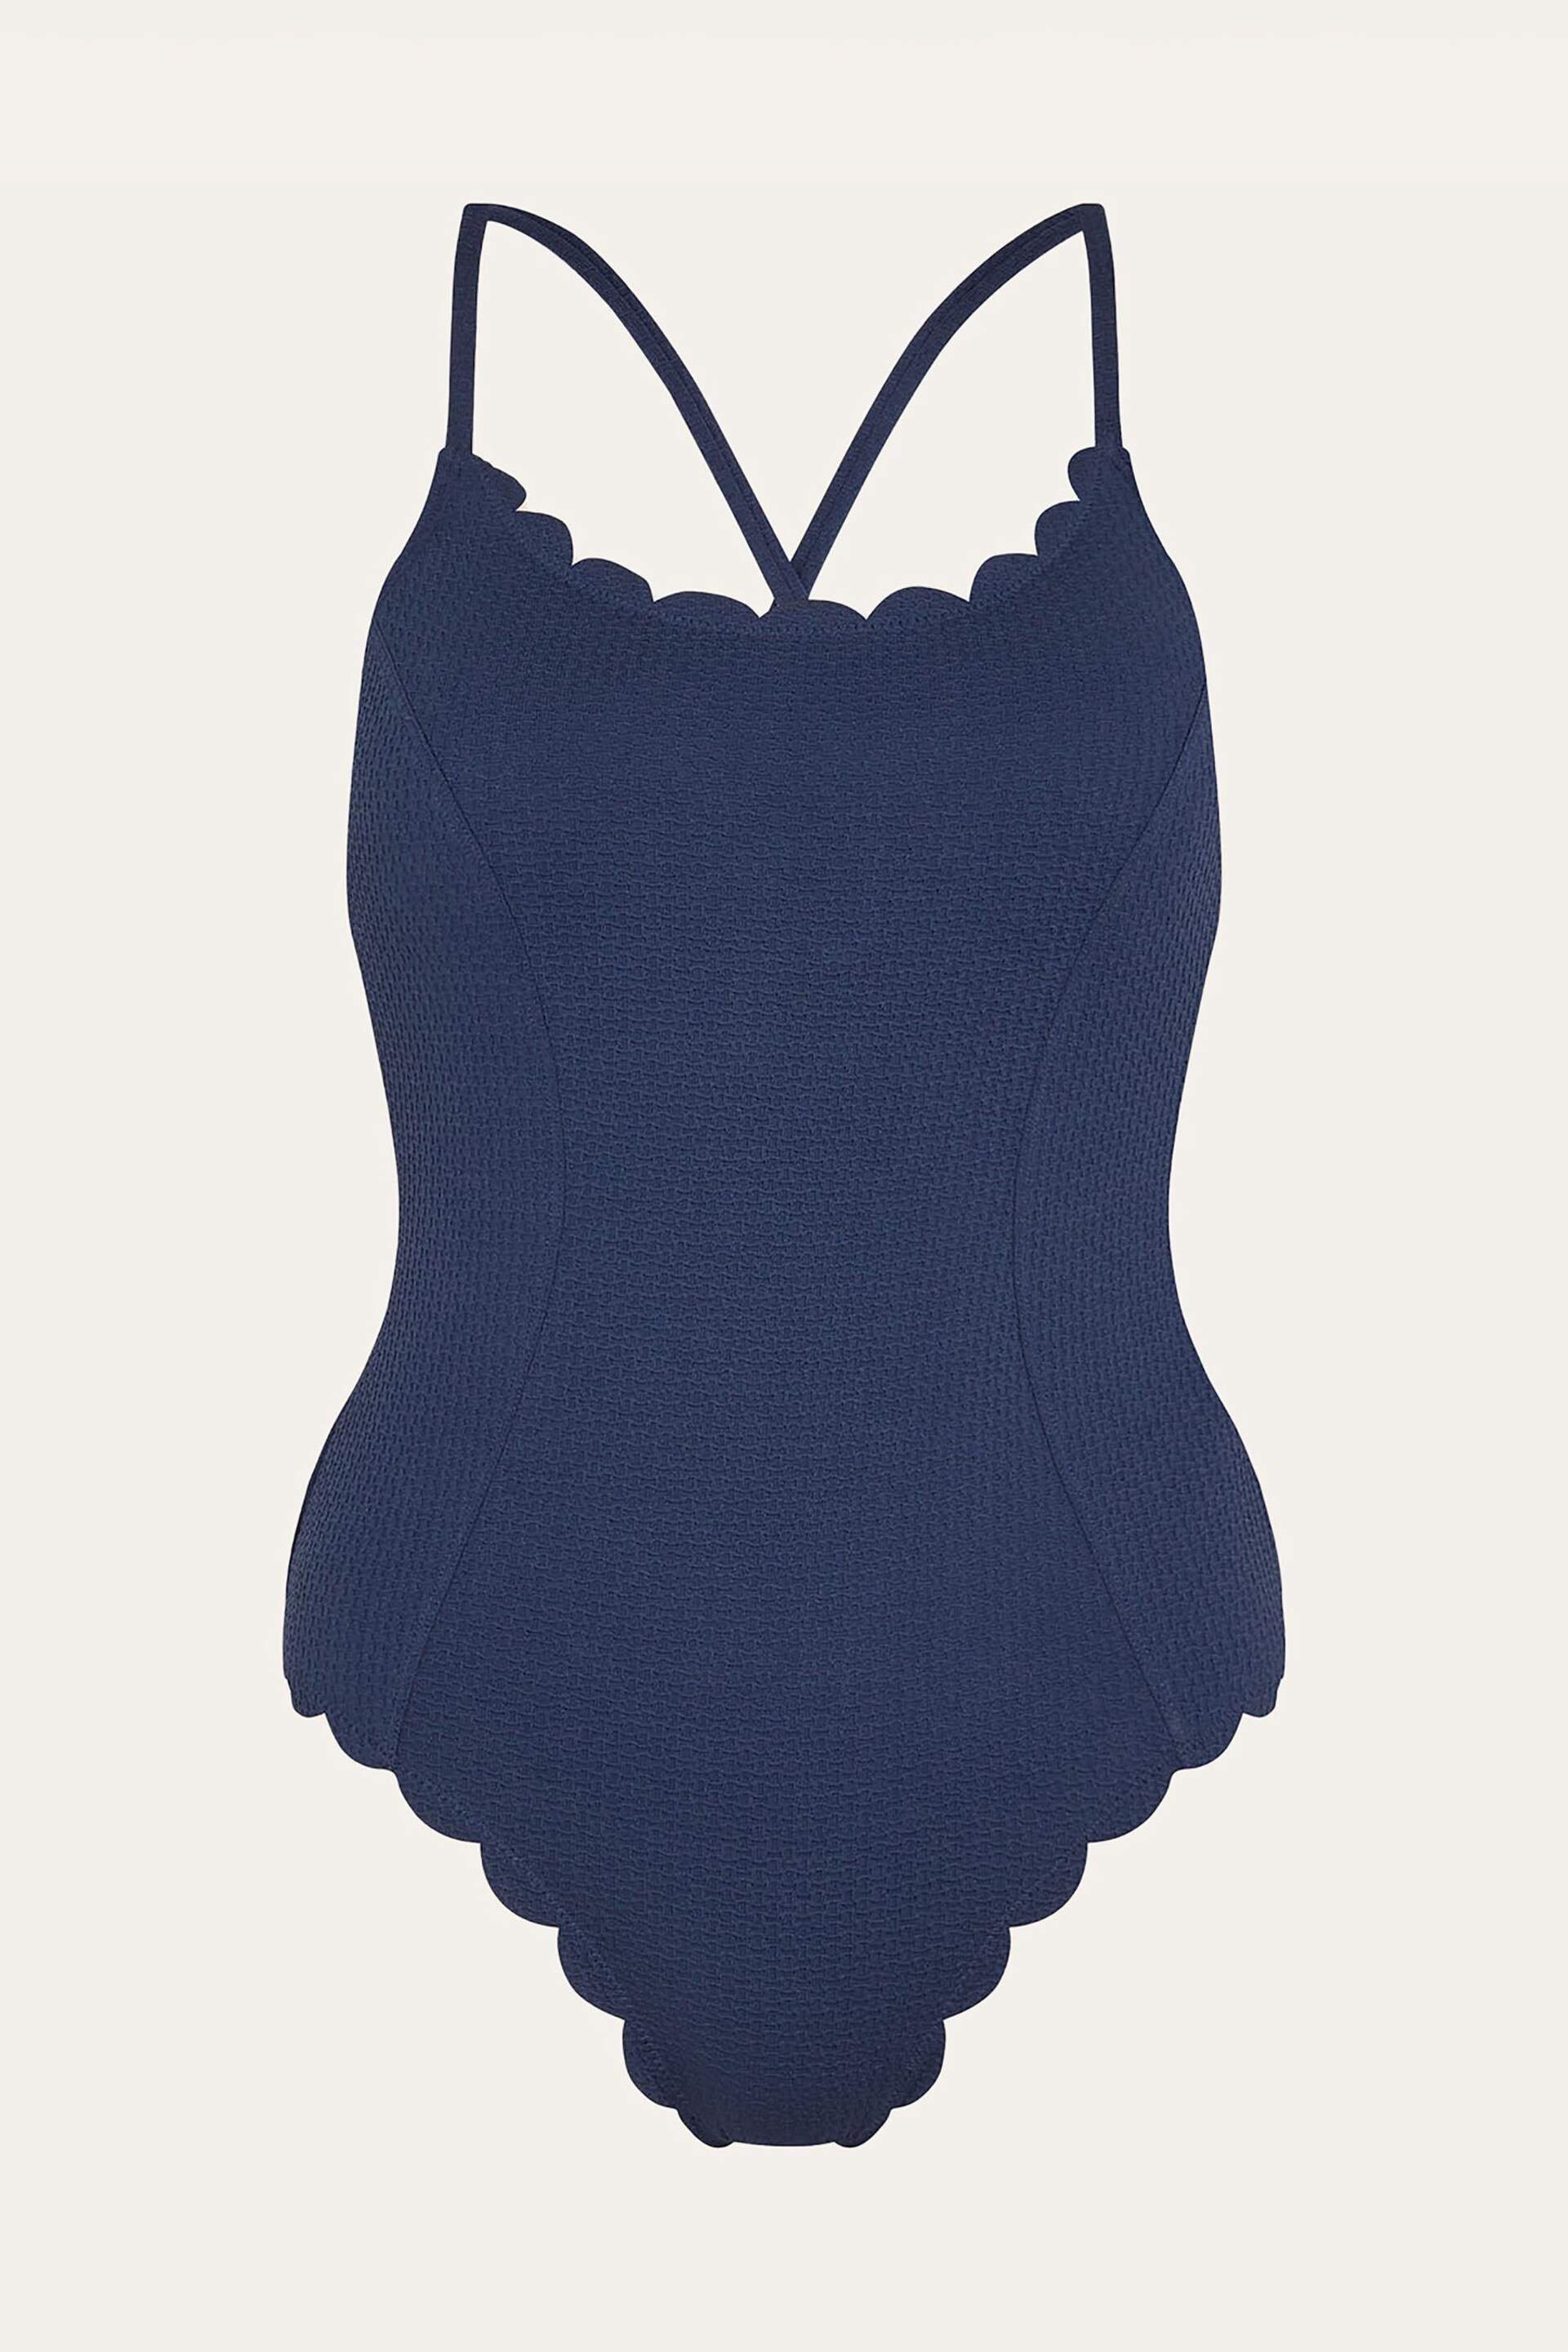 Accessorize Blue Textured Scallop Swimsuit - Image 4 of 4